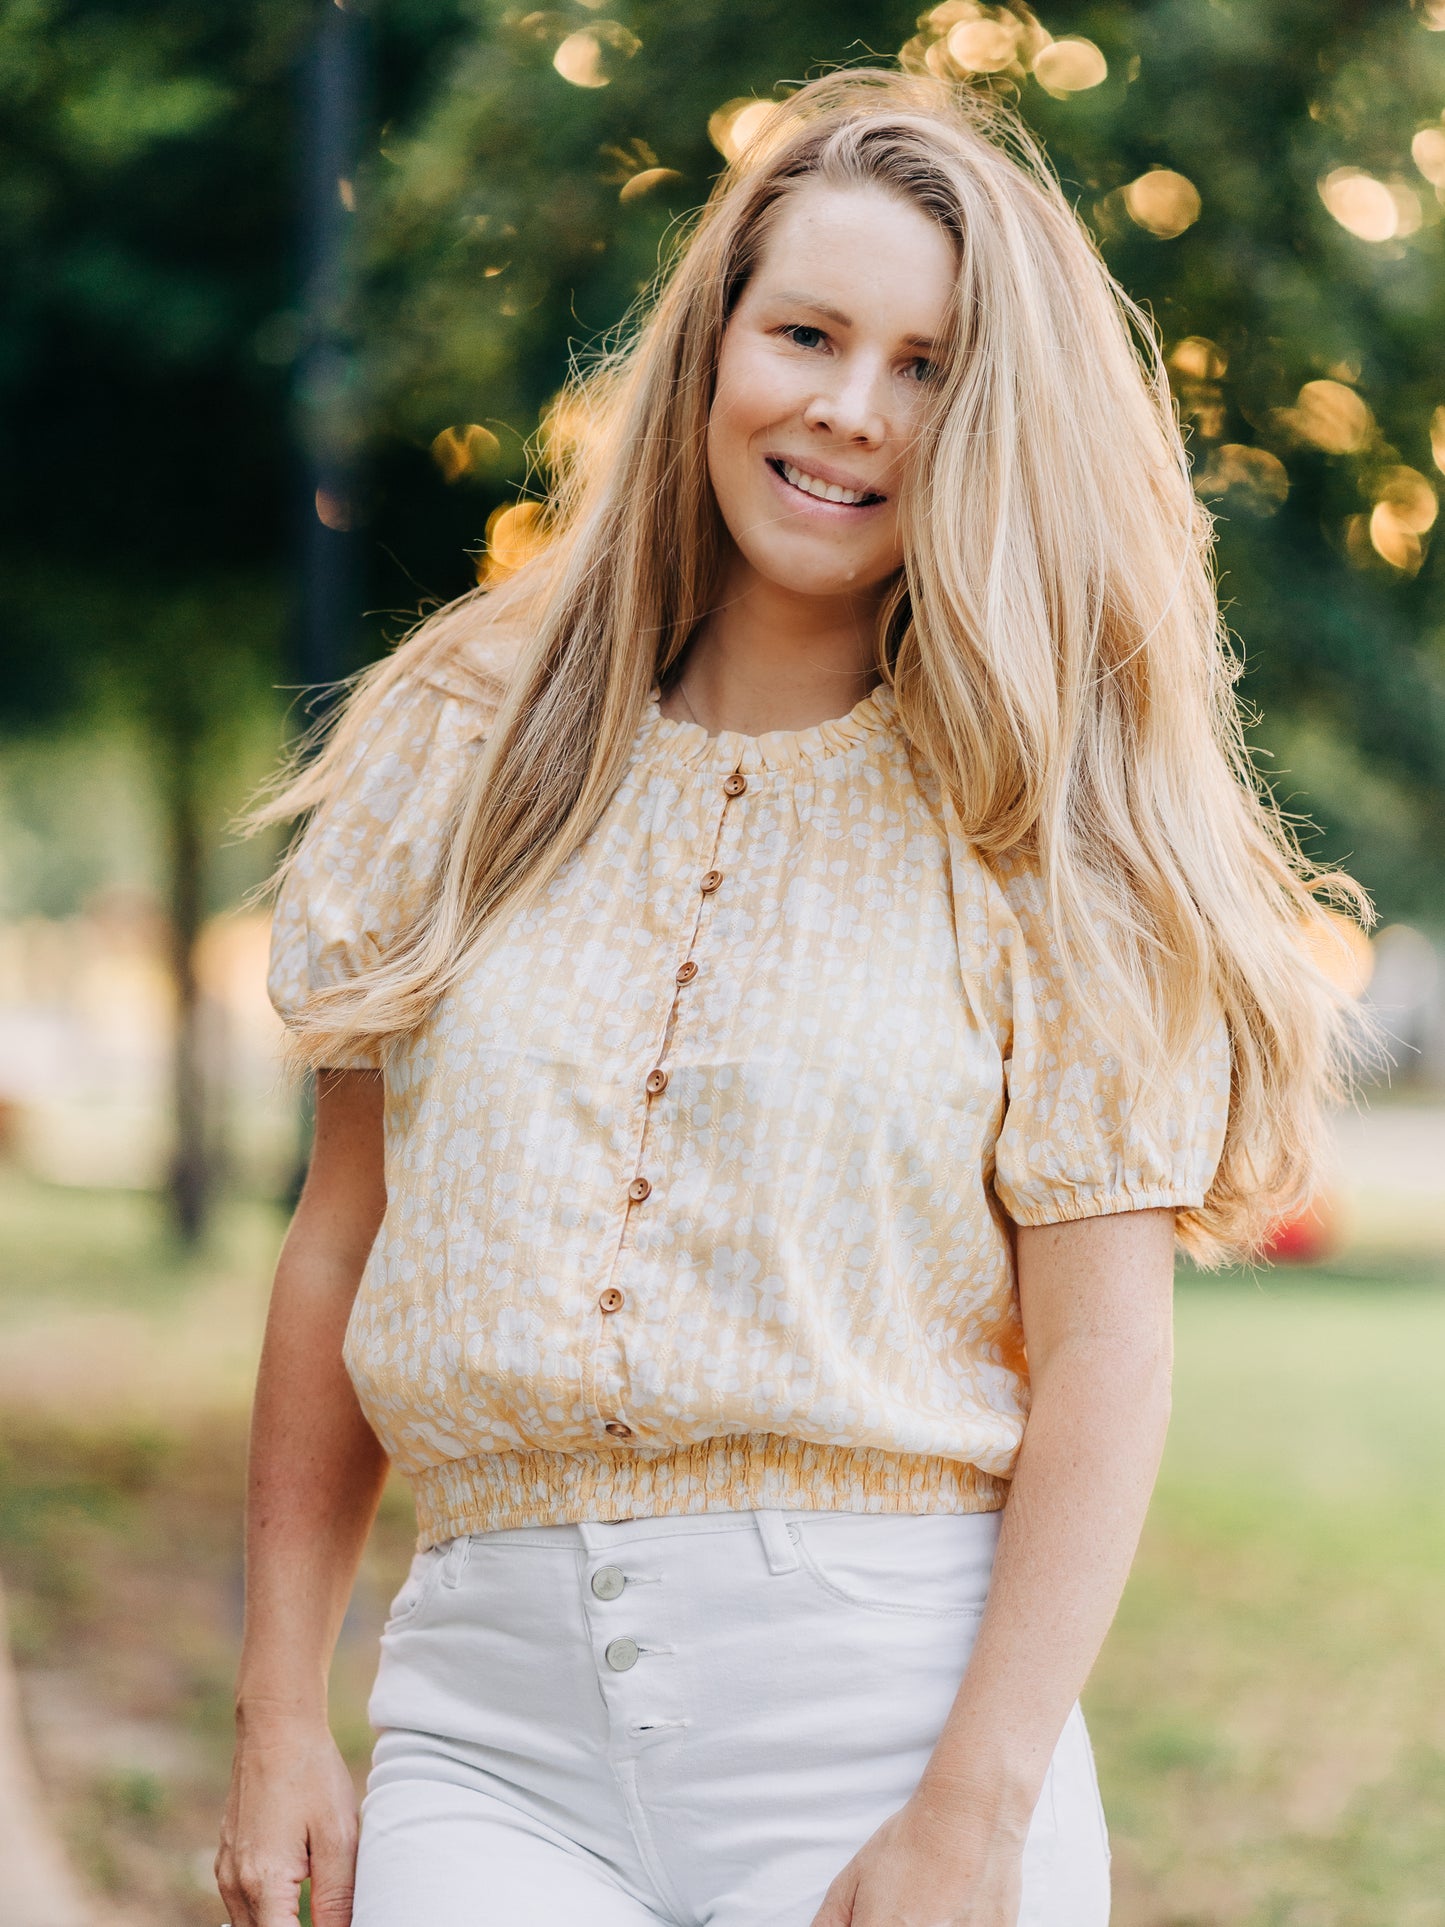 This image of a woman features the product Classic Button Top - I’ve Got Sunshine. This top has functional buttons down the bodice, puff sleeves, and elastic ruffle neckline. It is a pattern of white flowers on a bright yellow background.